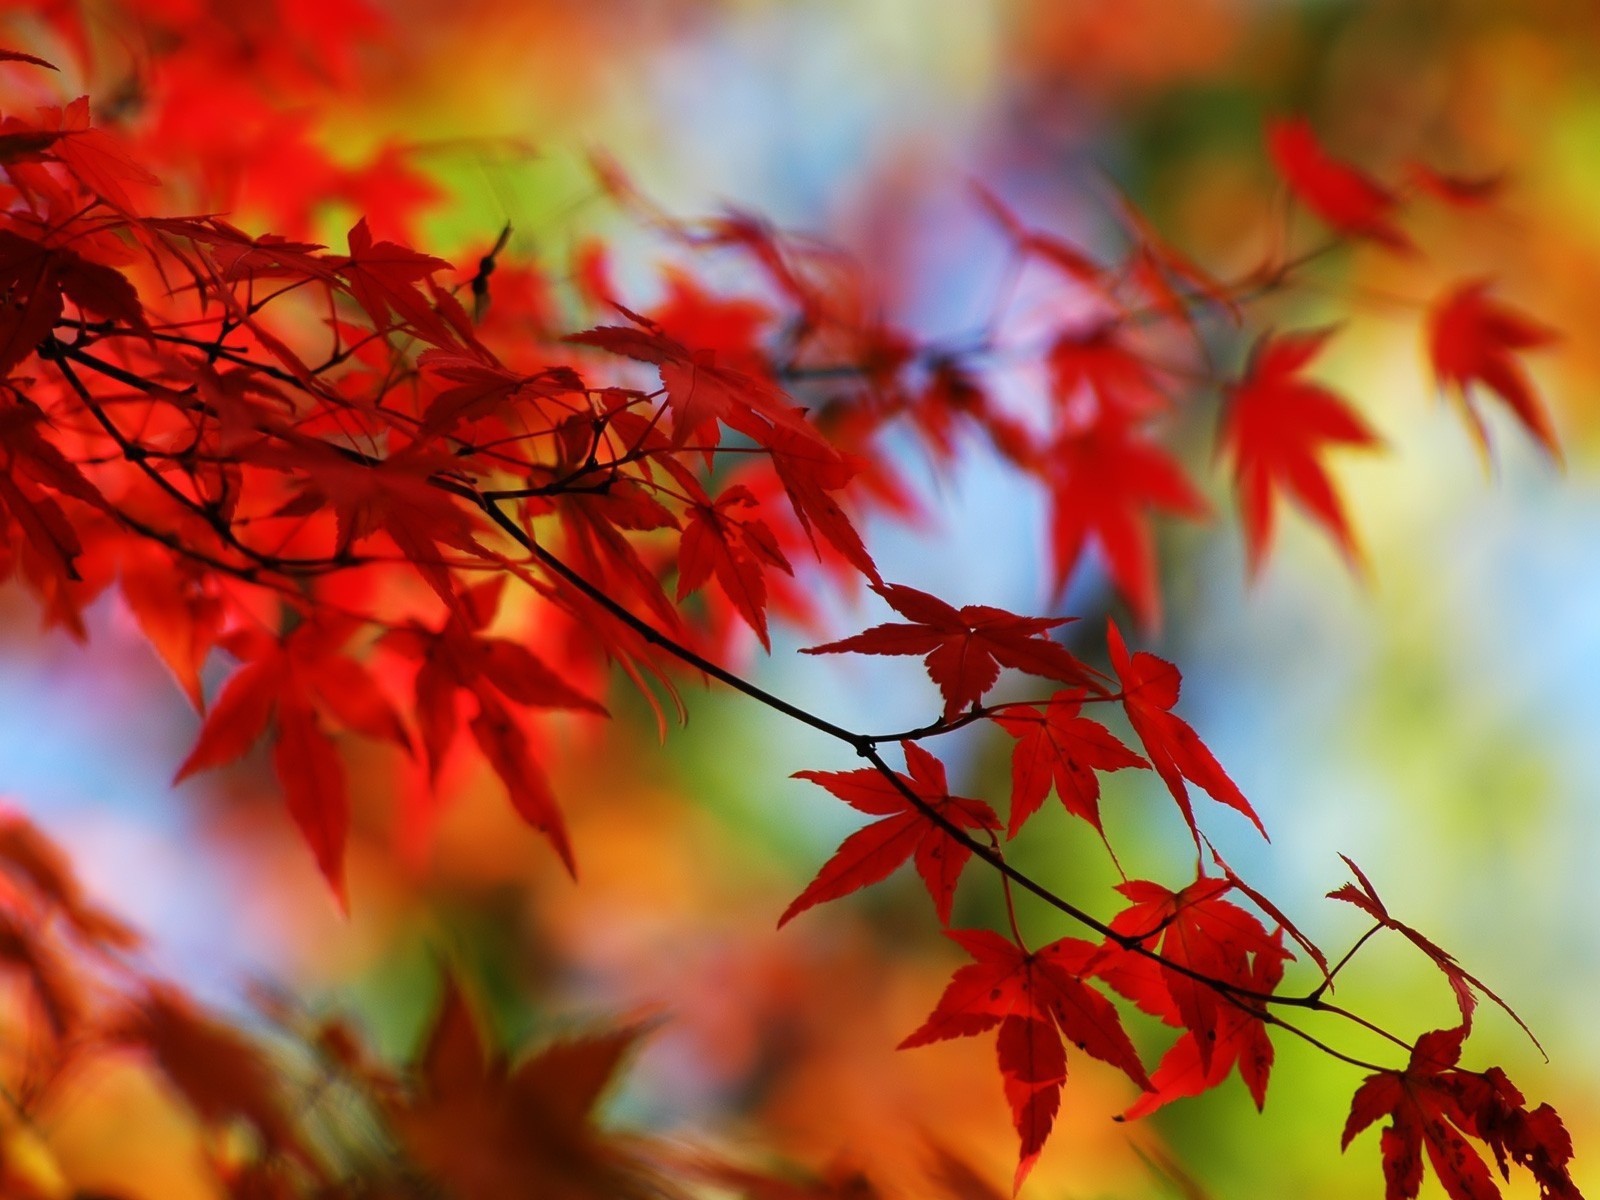 the red leaves of the autumn